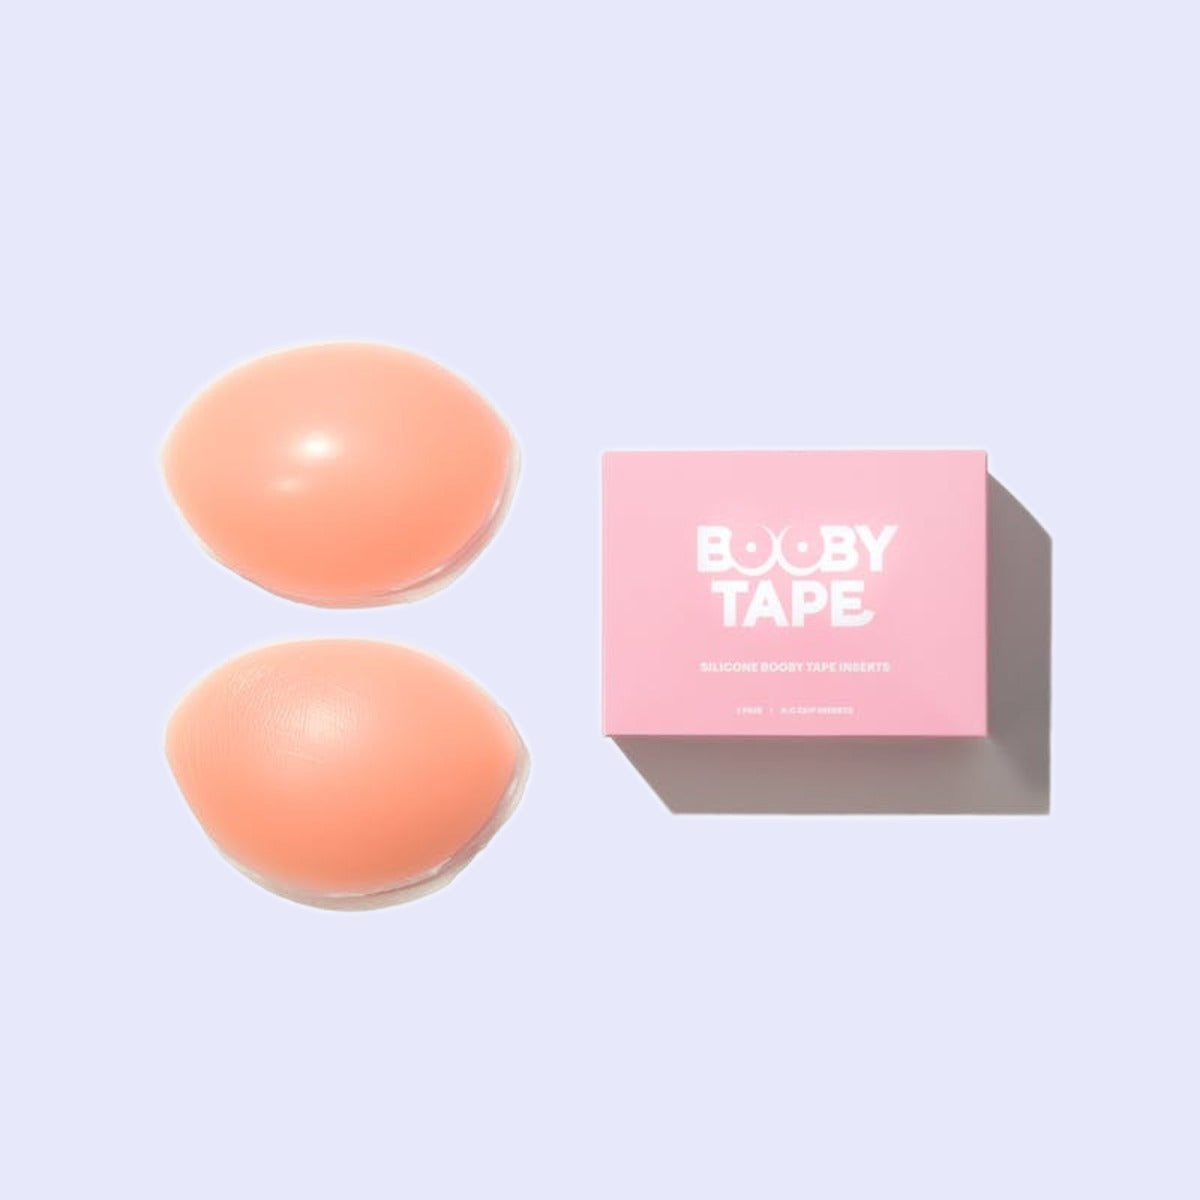 Booby Tape - Silicone Booby Tape Inserts 1 Pair Size A-C Cup Inserts